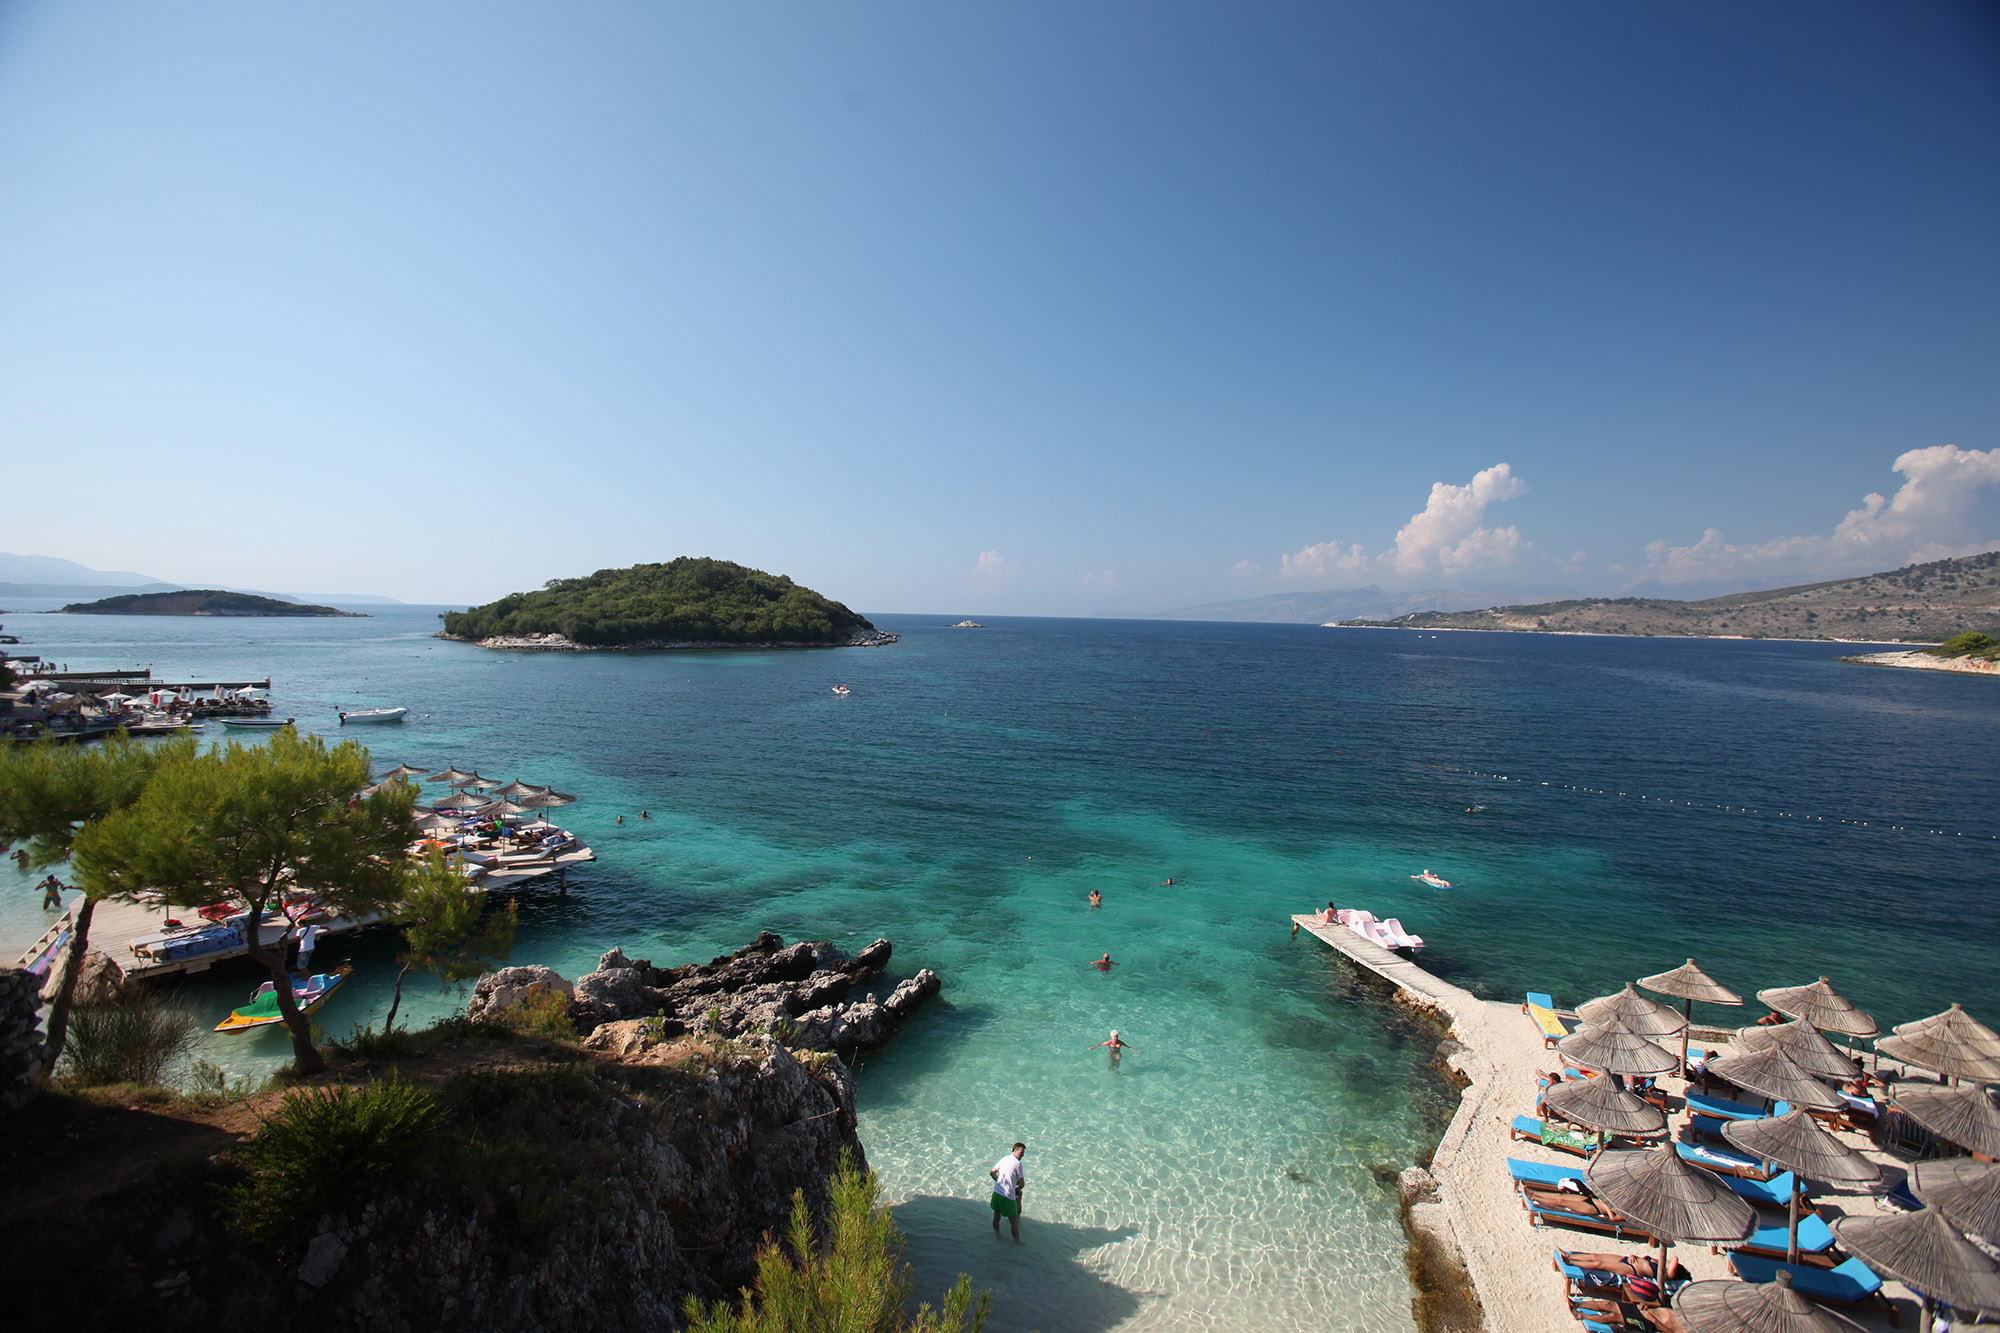 Worried Croatia will be crowded? Let me talk you into Albania…